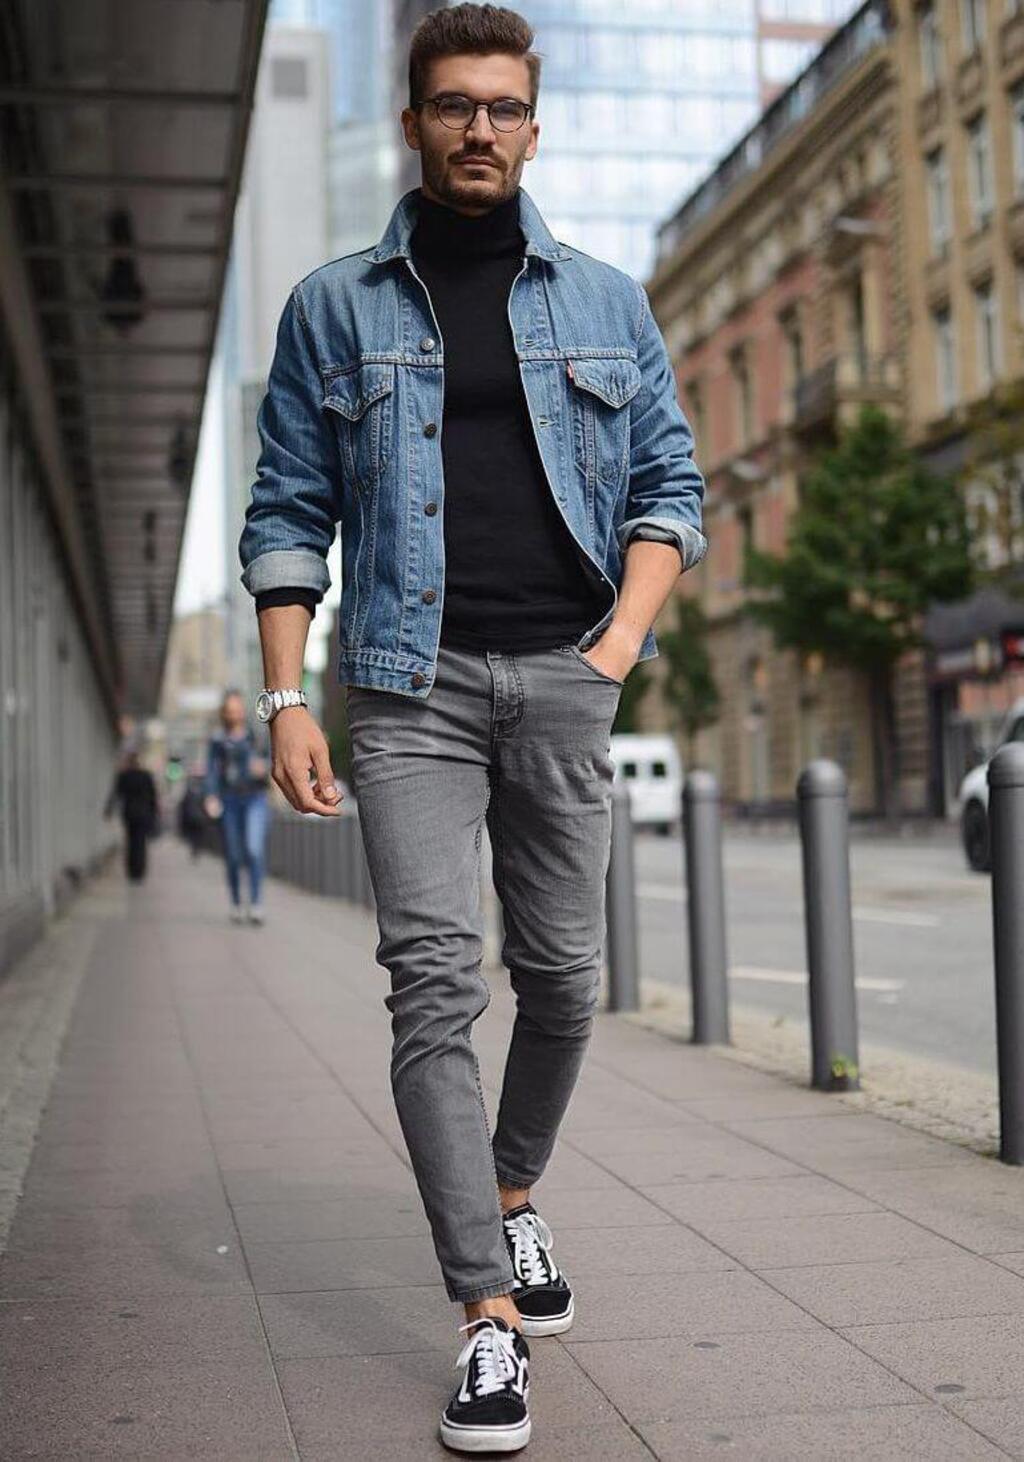 How to Wear a Denim Jacket for Guys